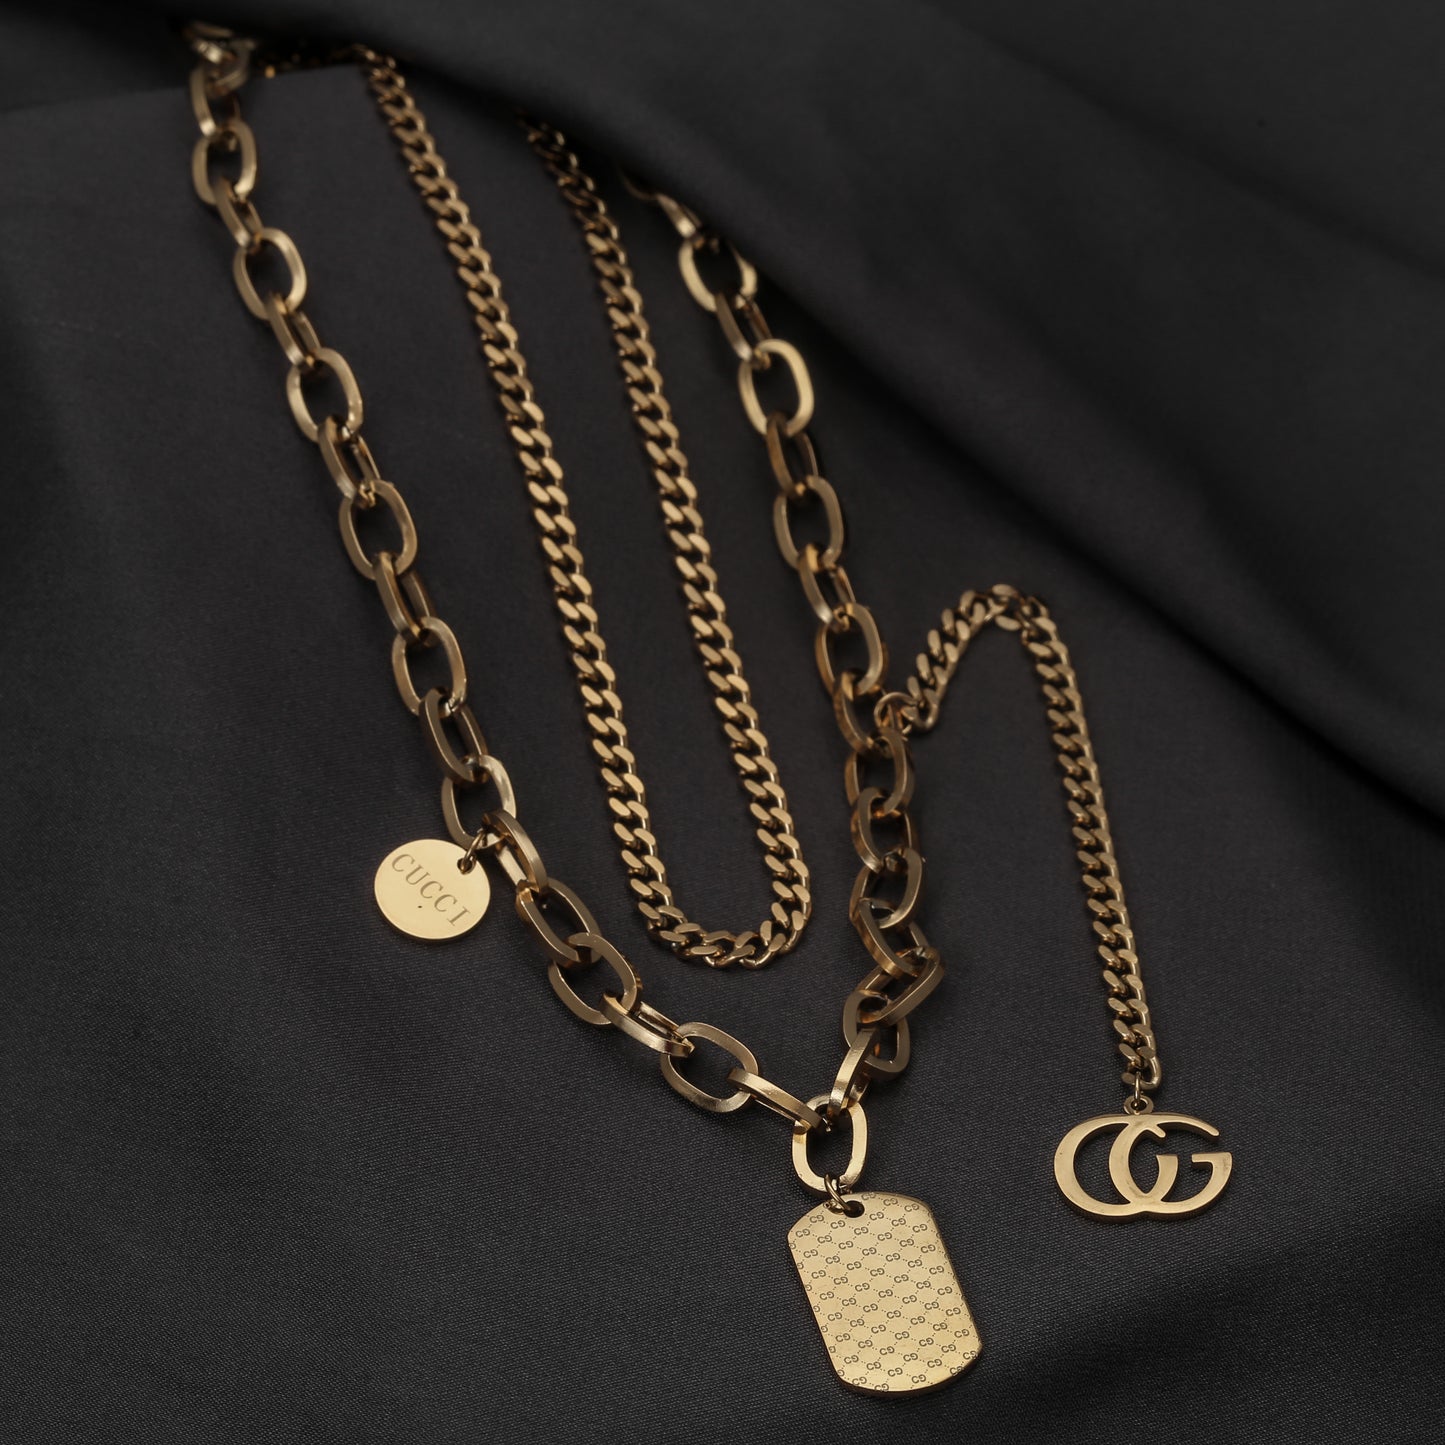 HEXAGONE GOLD PEDANT NECKLACE